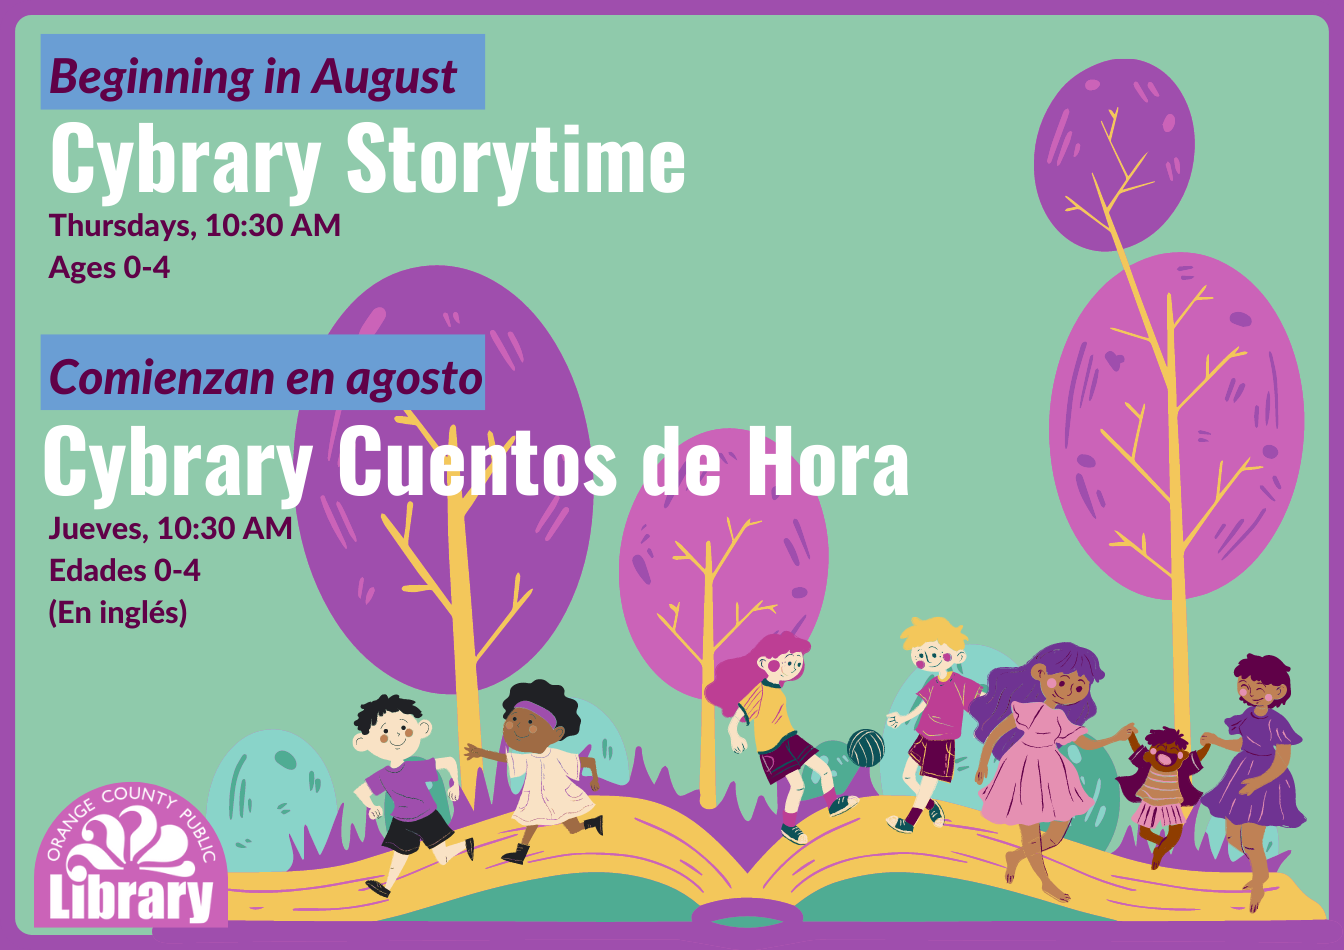 green flier with purple trees and children over an open book. text: cybrary storytime thursdays, 10:30, ages 0-4